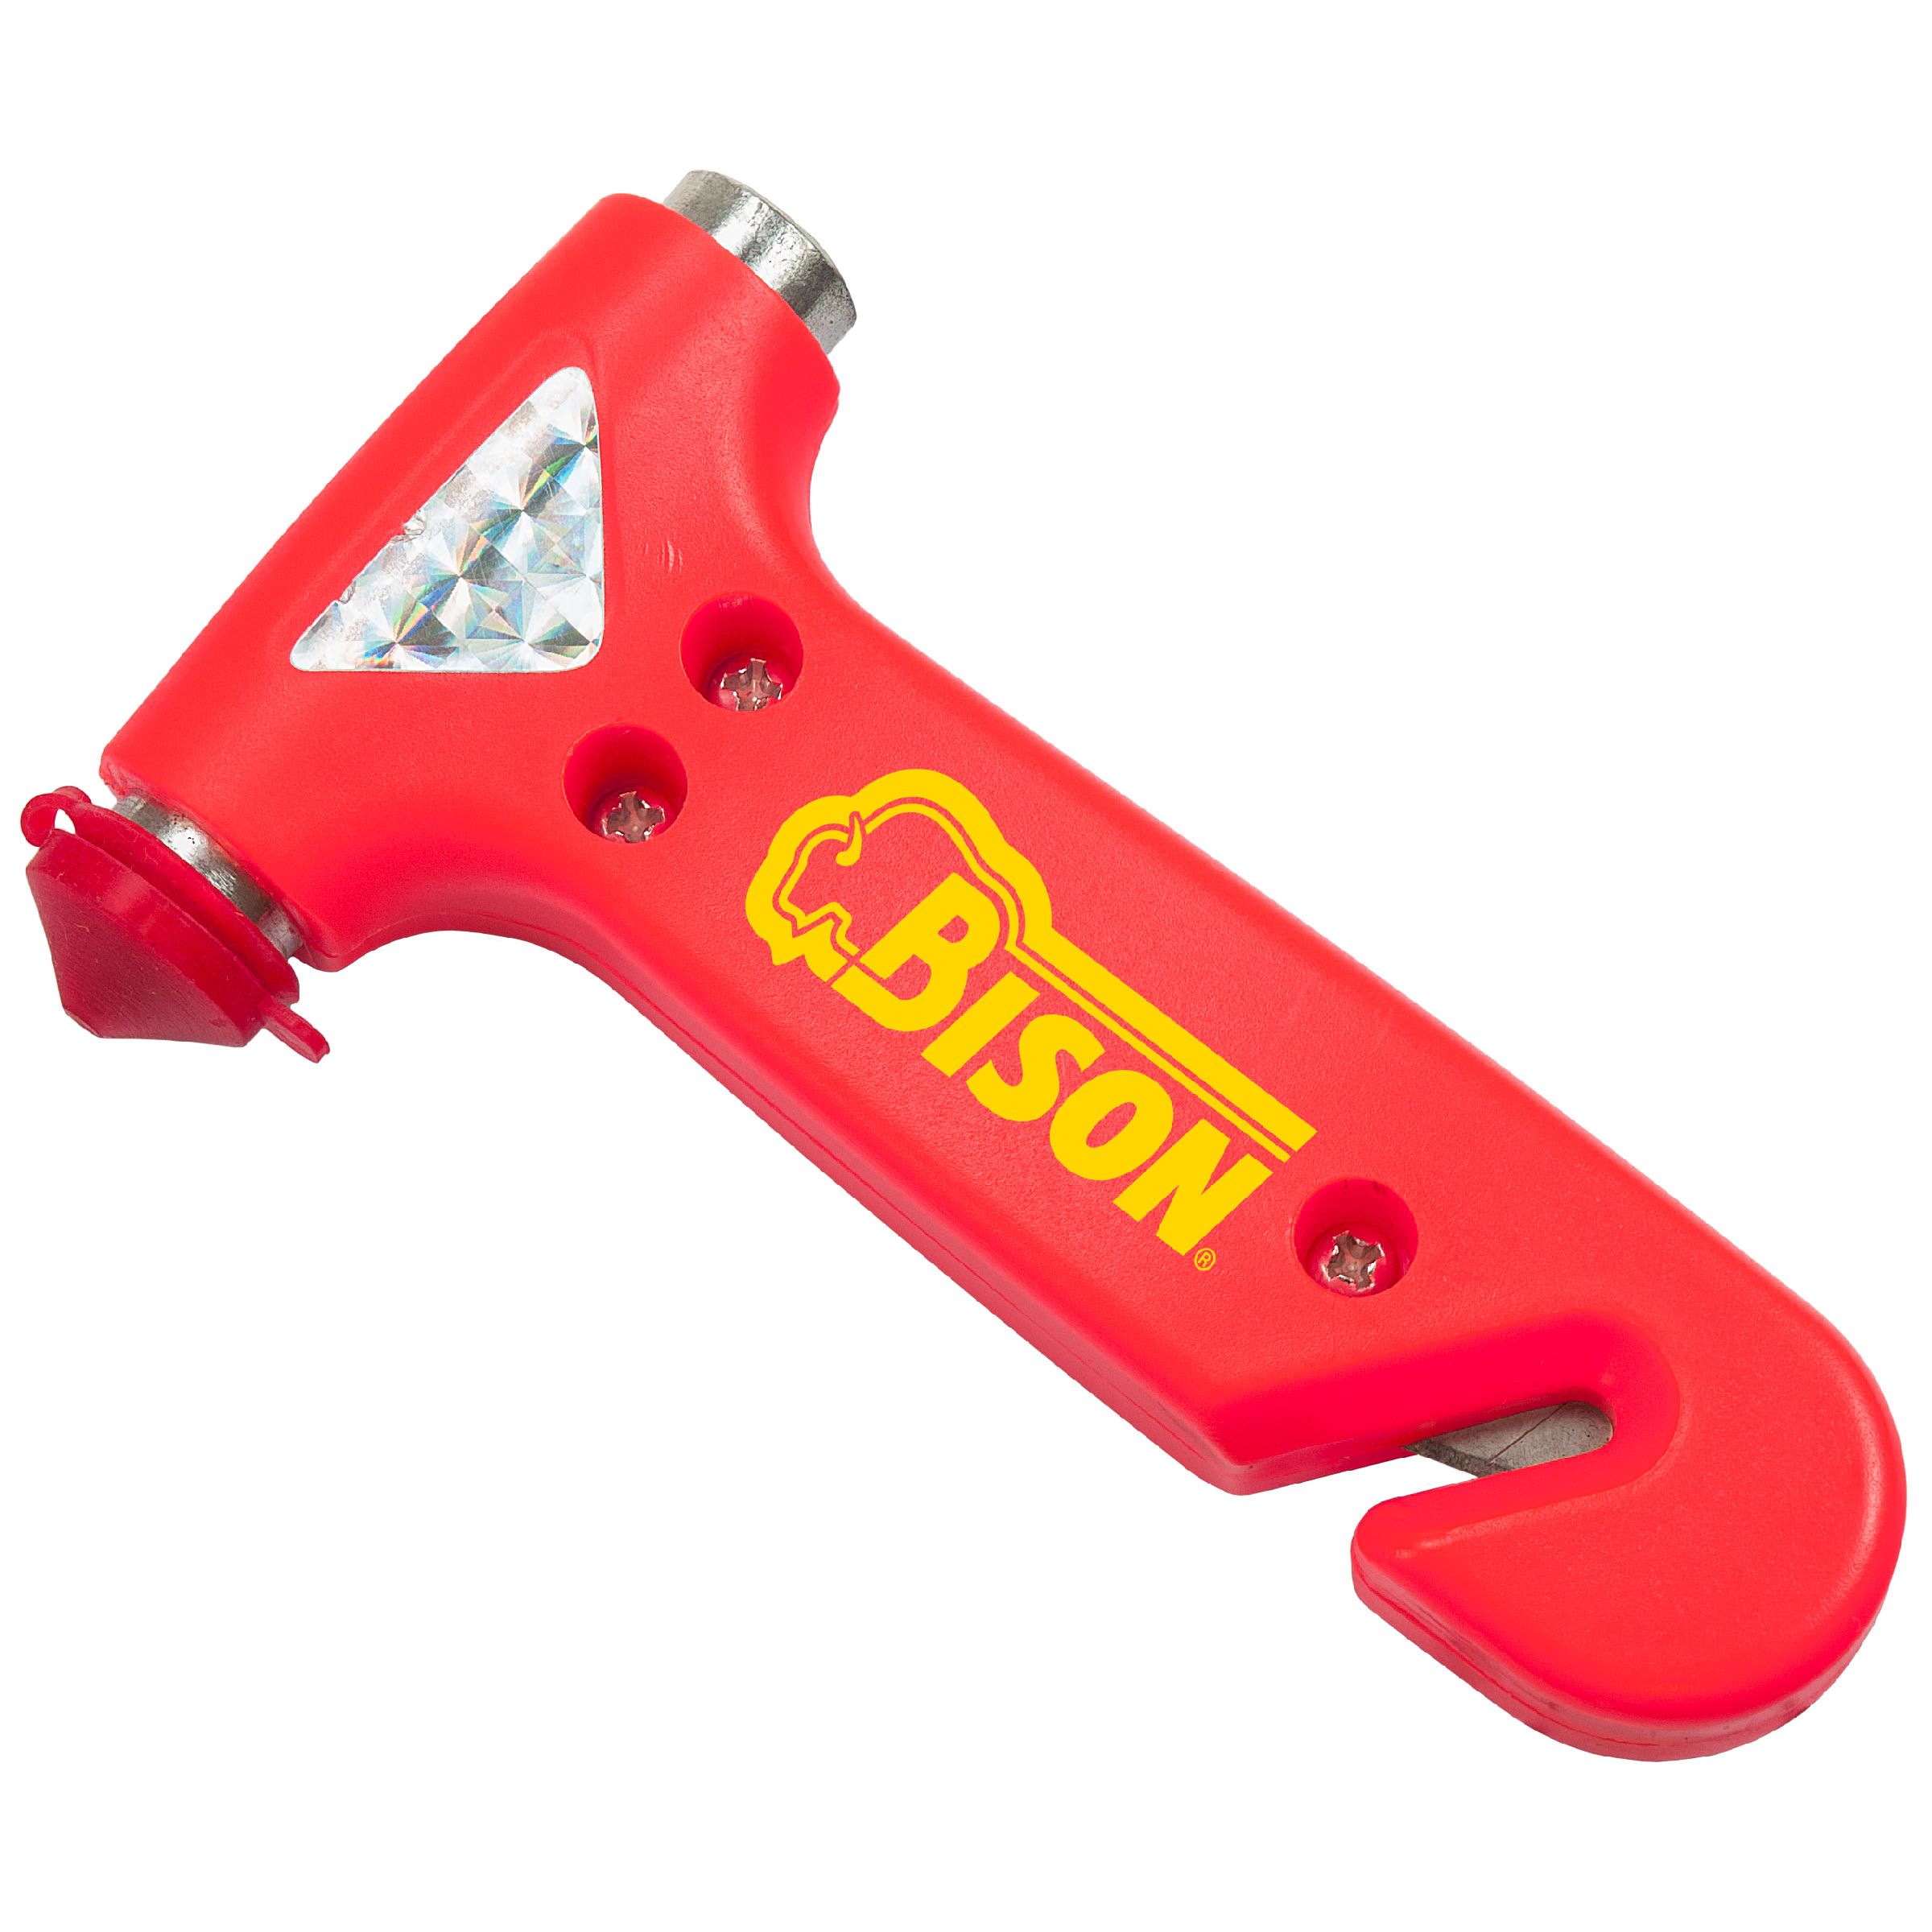 red plastic hammer with yellow font called "bison"